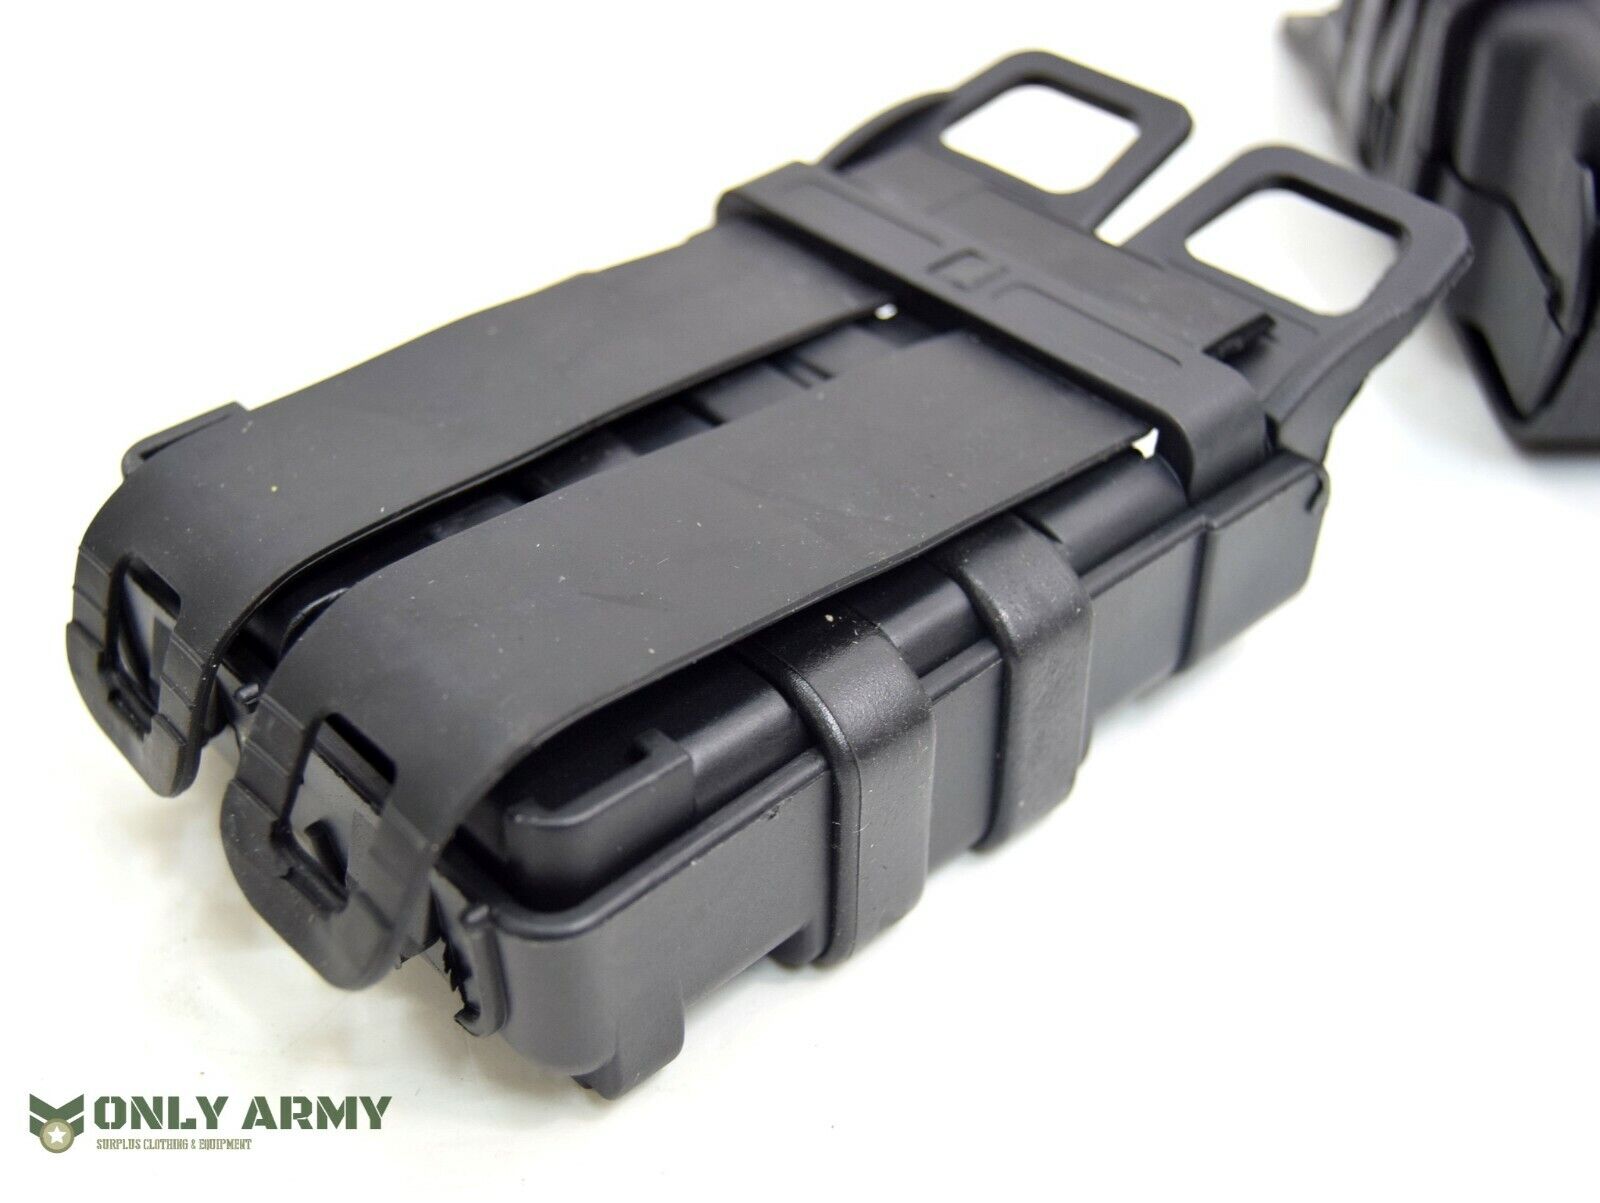 Black Fast Mag Pistol / Rifle Pouch MOLLE Hard Shell Mag Holder UKSF Army Style